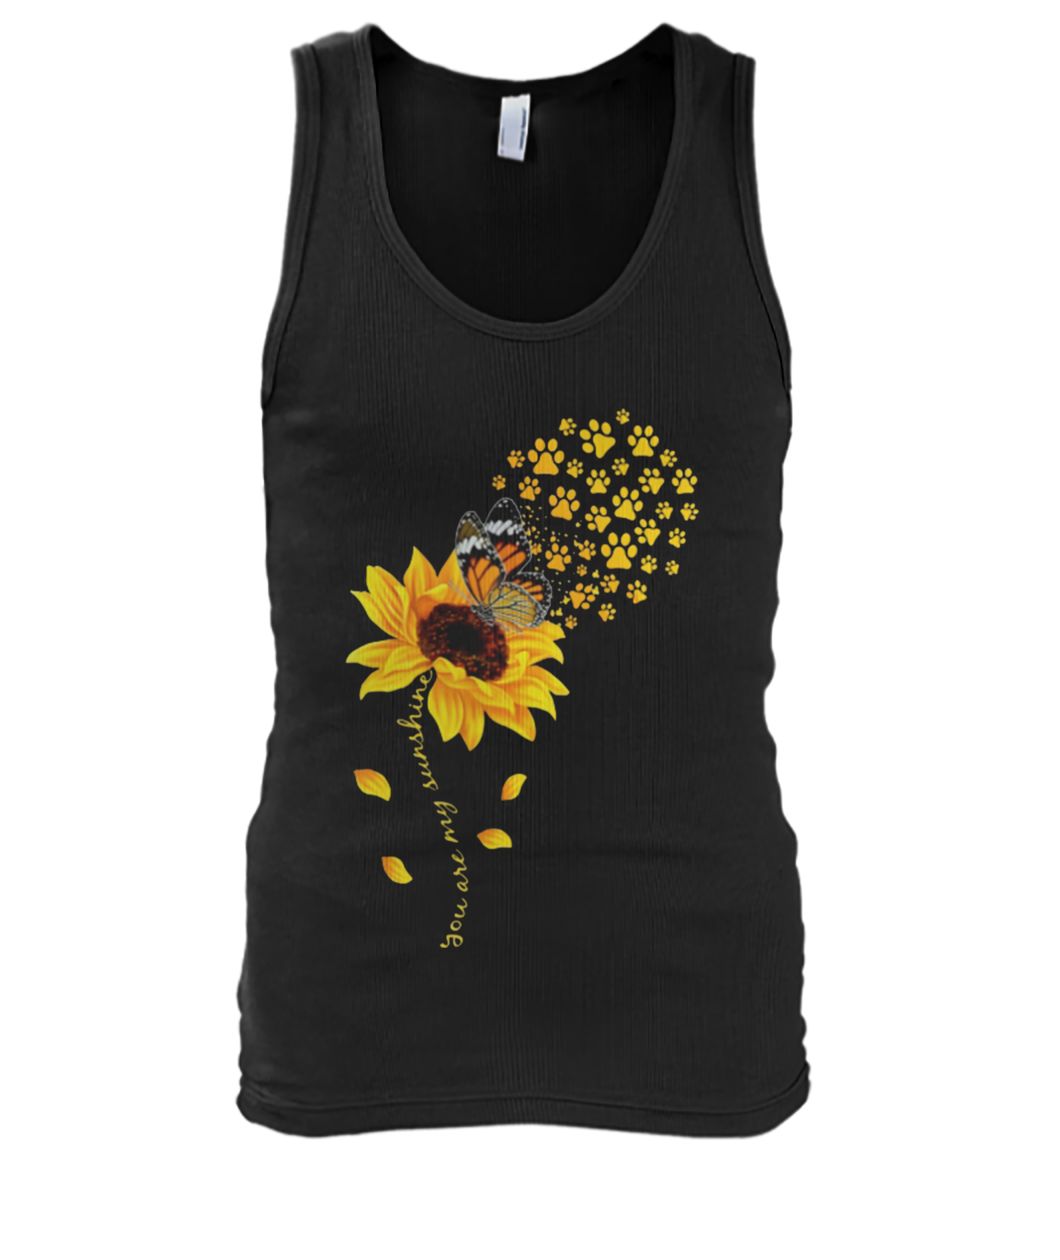 You are my sunshine dog paw sunflower men's tank top